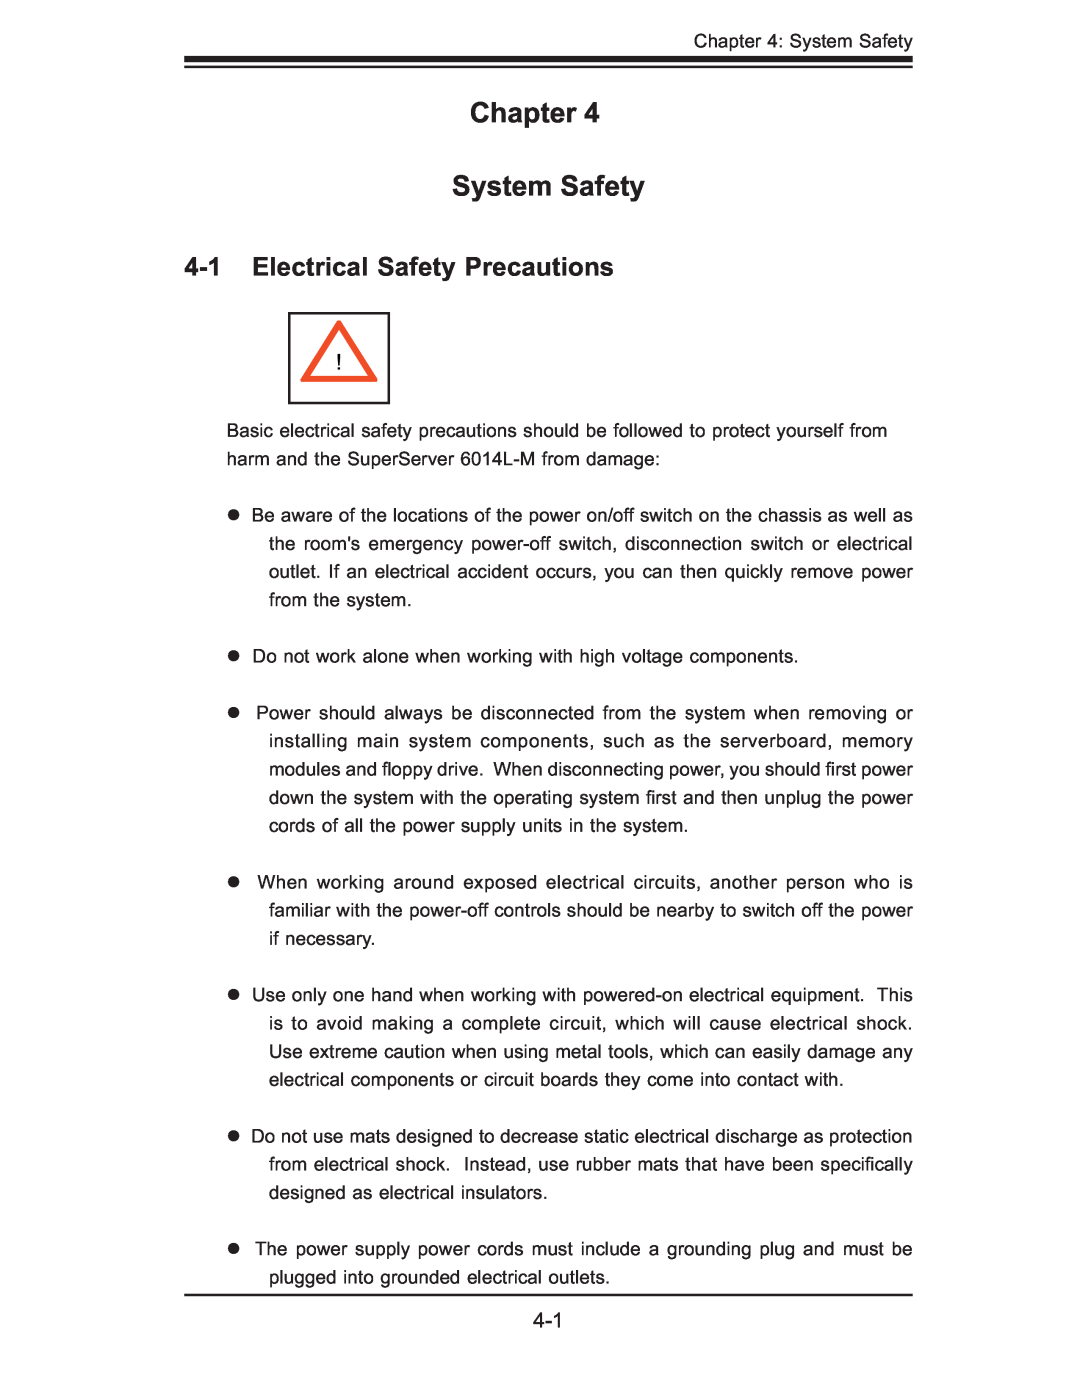 SUPER MICRO Computer 6014L-M manual Chapter System Safety, Electrical Safety Precautions 